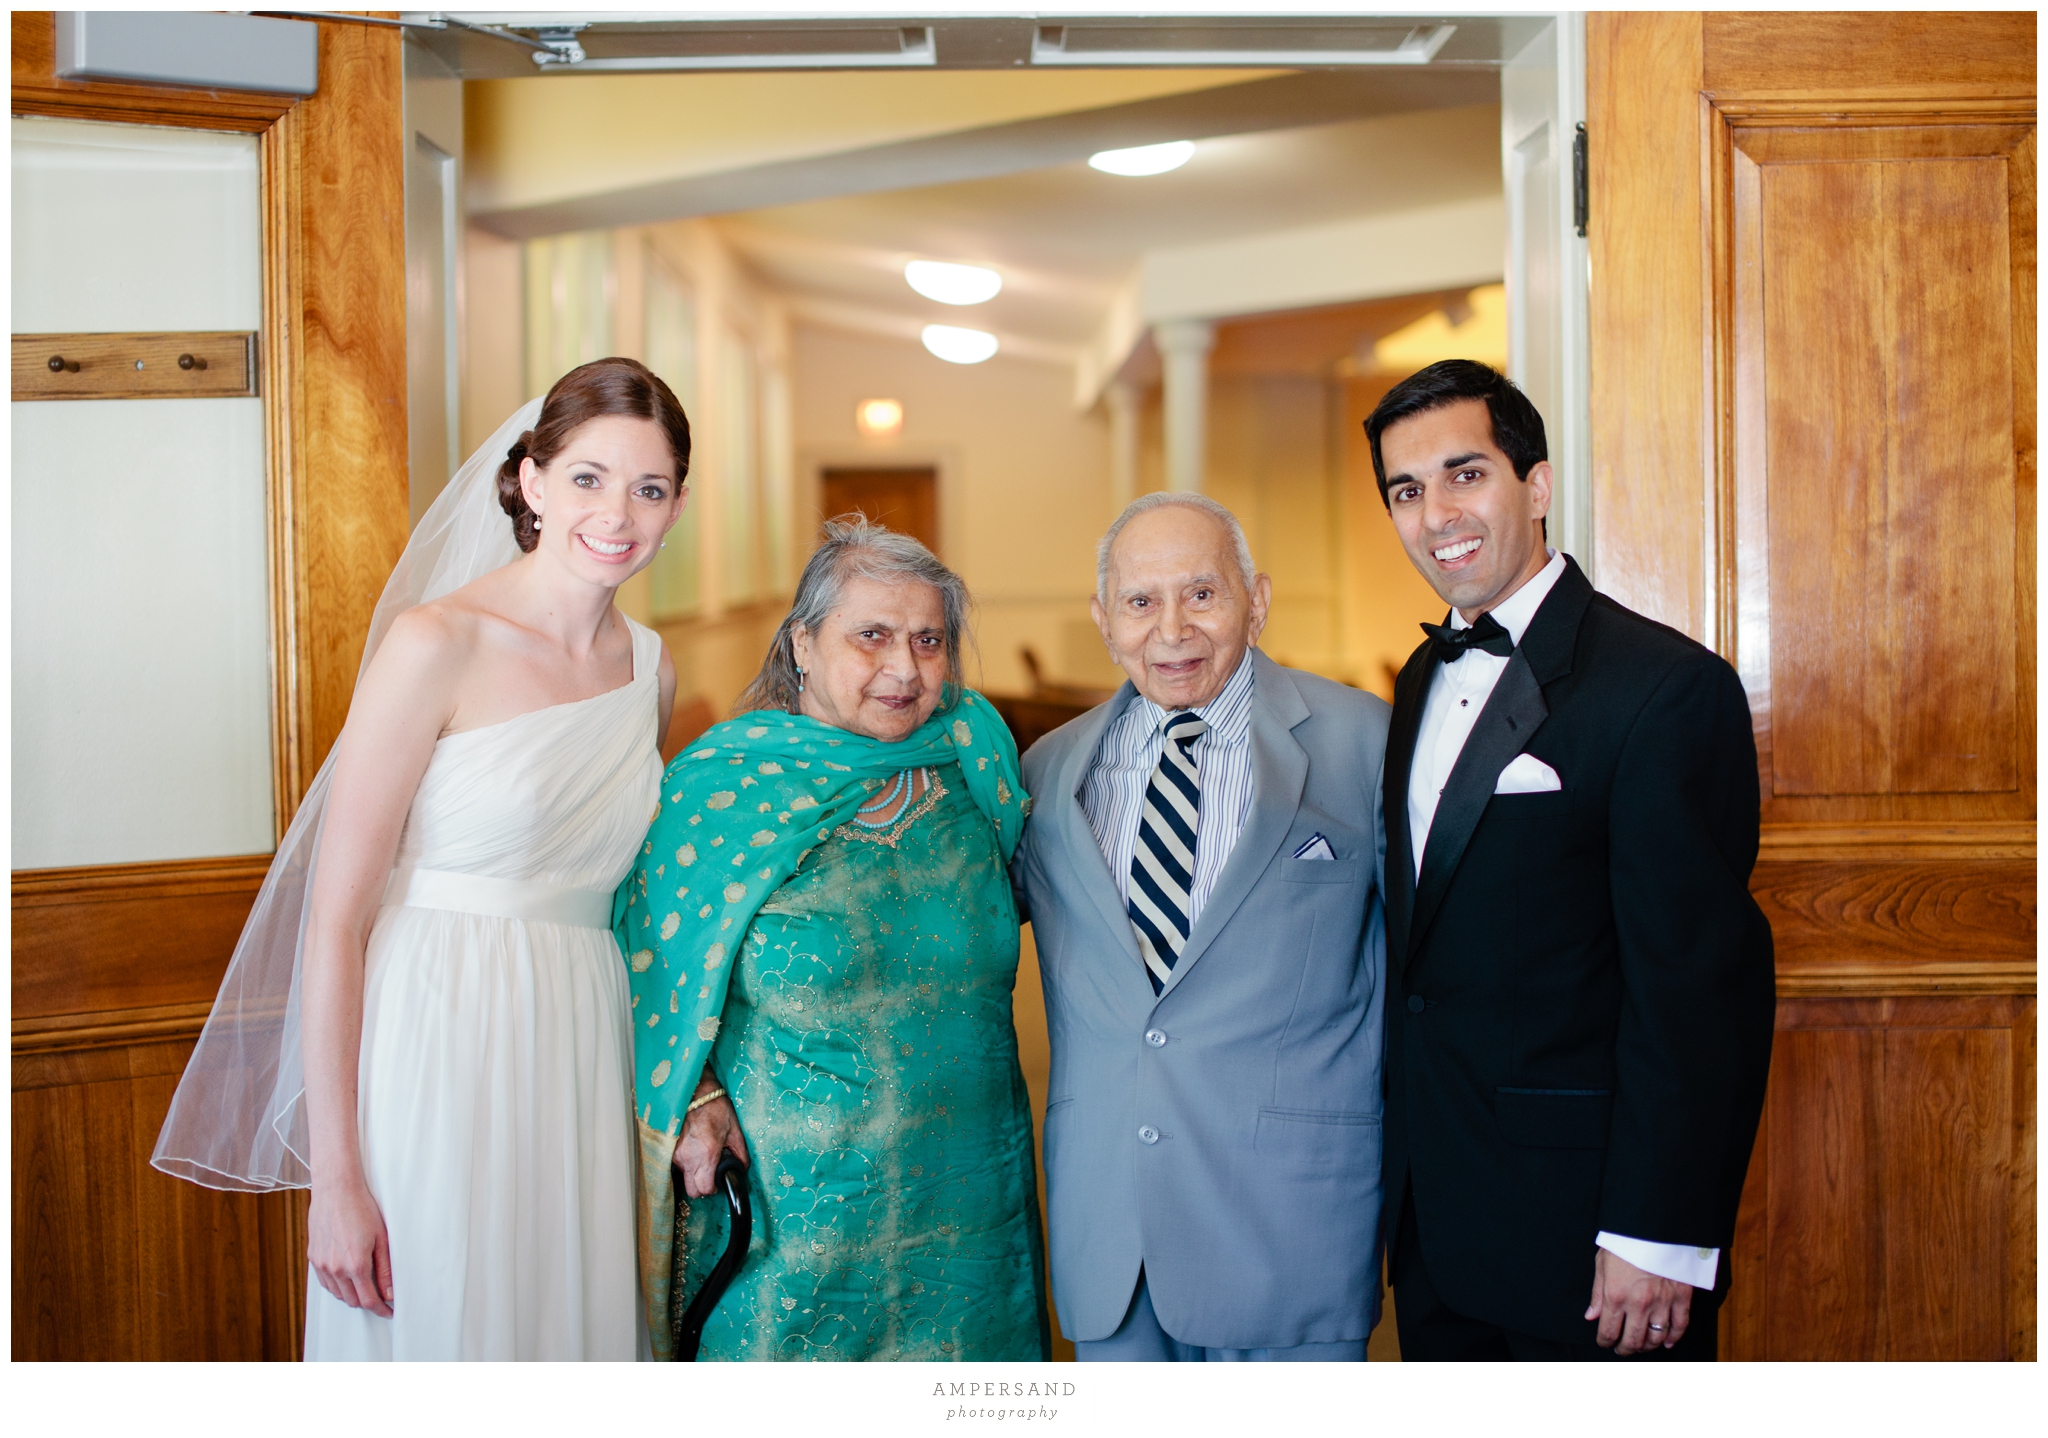 Grandparents traveled from India for Sam & Jaime's wedding // Photos by Ampersand Photography